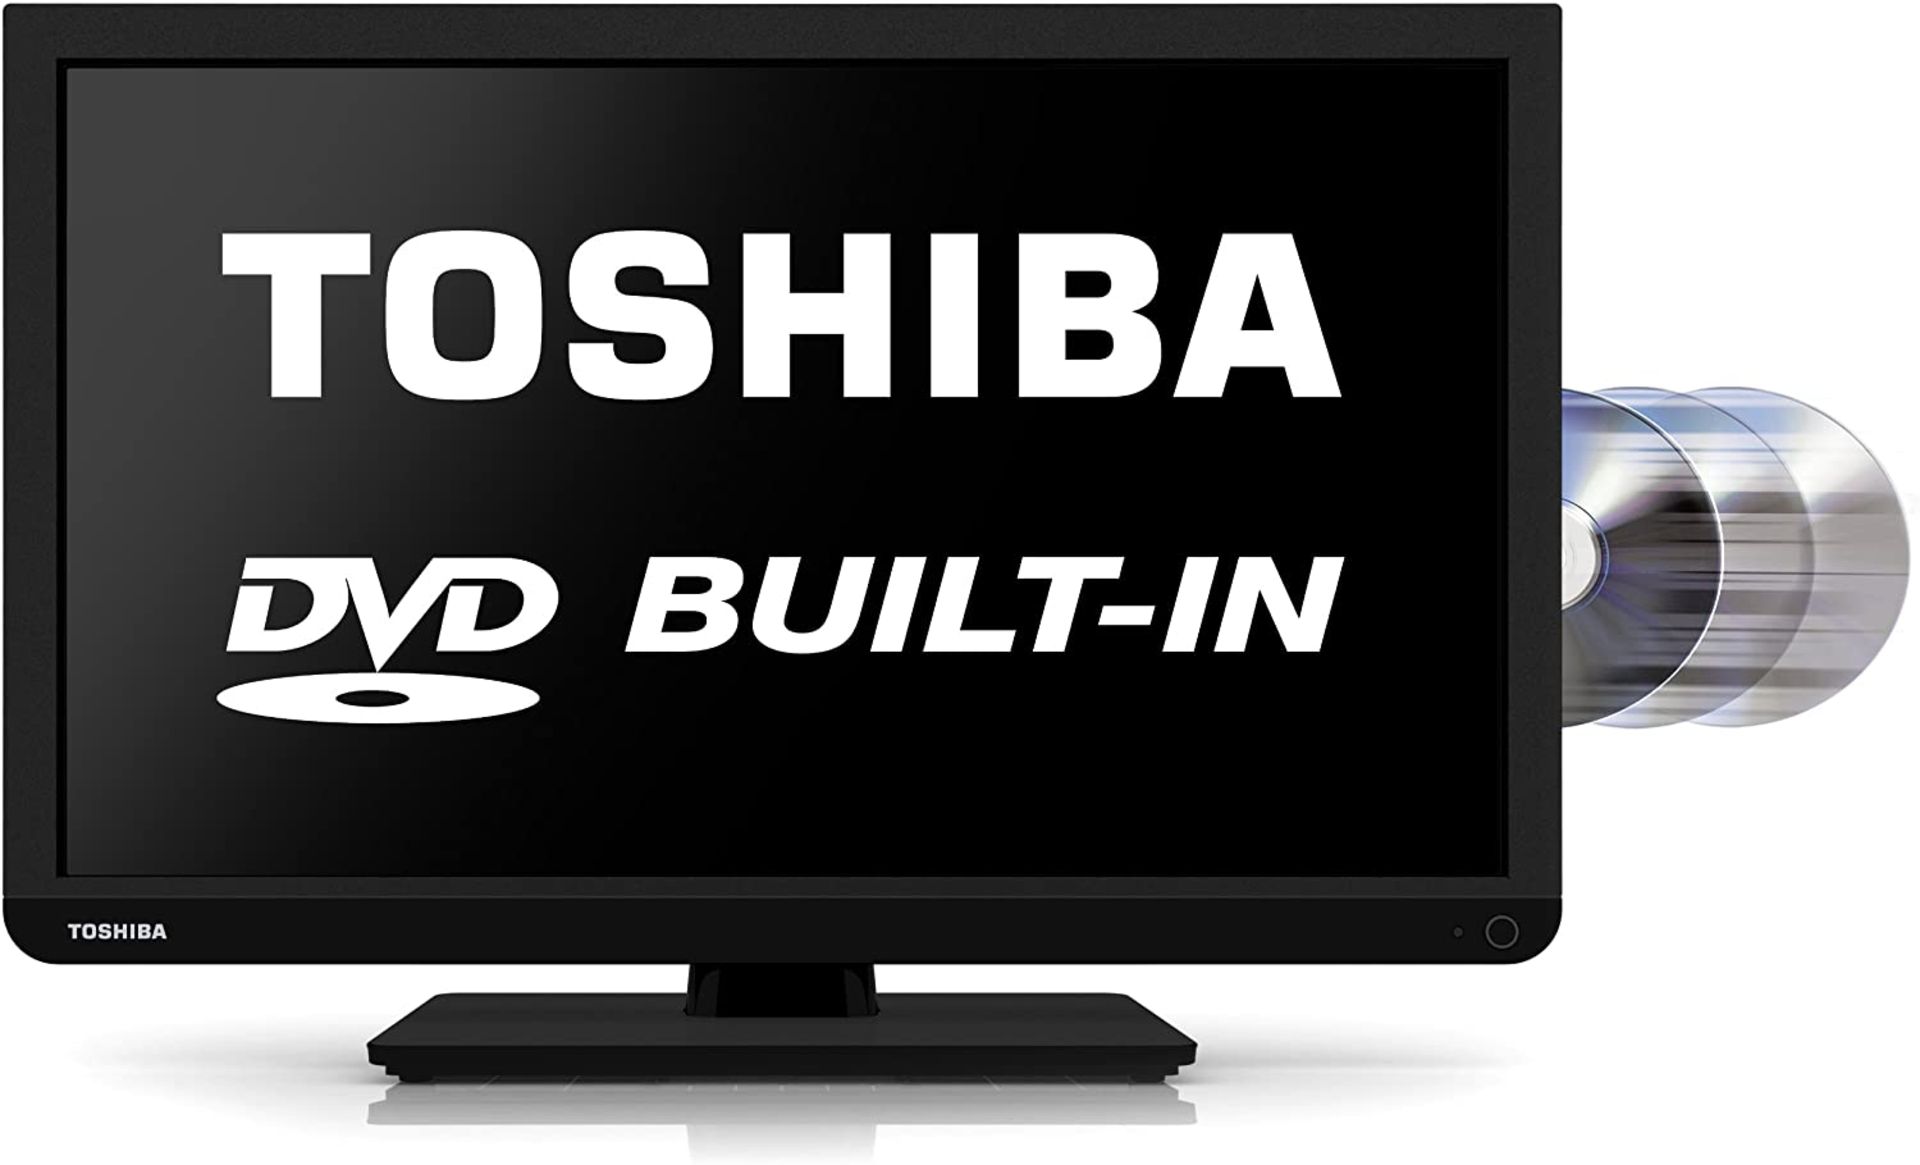 (M30) Toshiba 22D1333B 22-inch Widescreen 1080p Full HD LED TV with Built-In DVD Player [Energy...